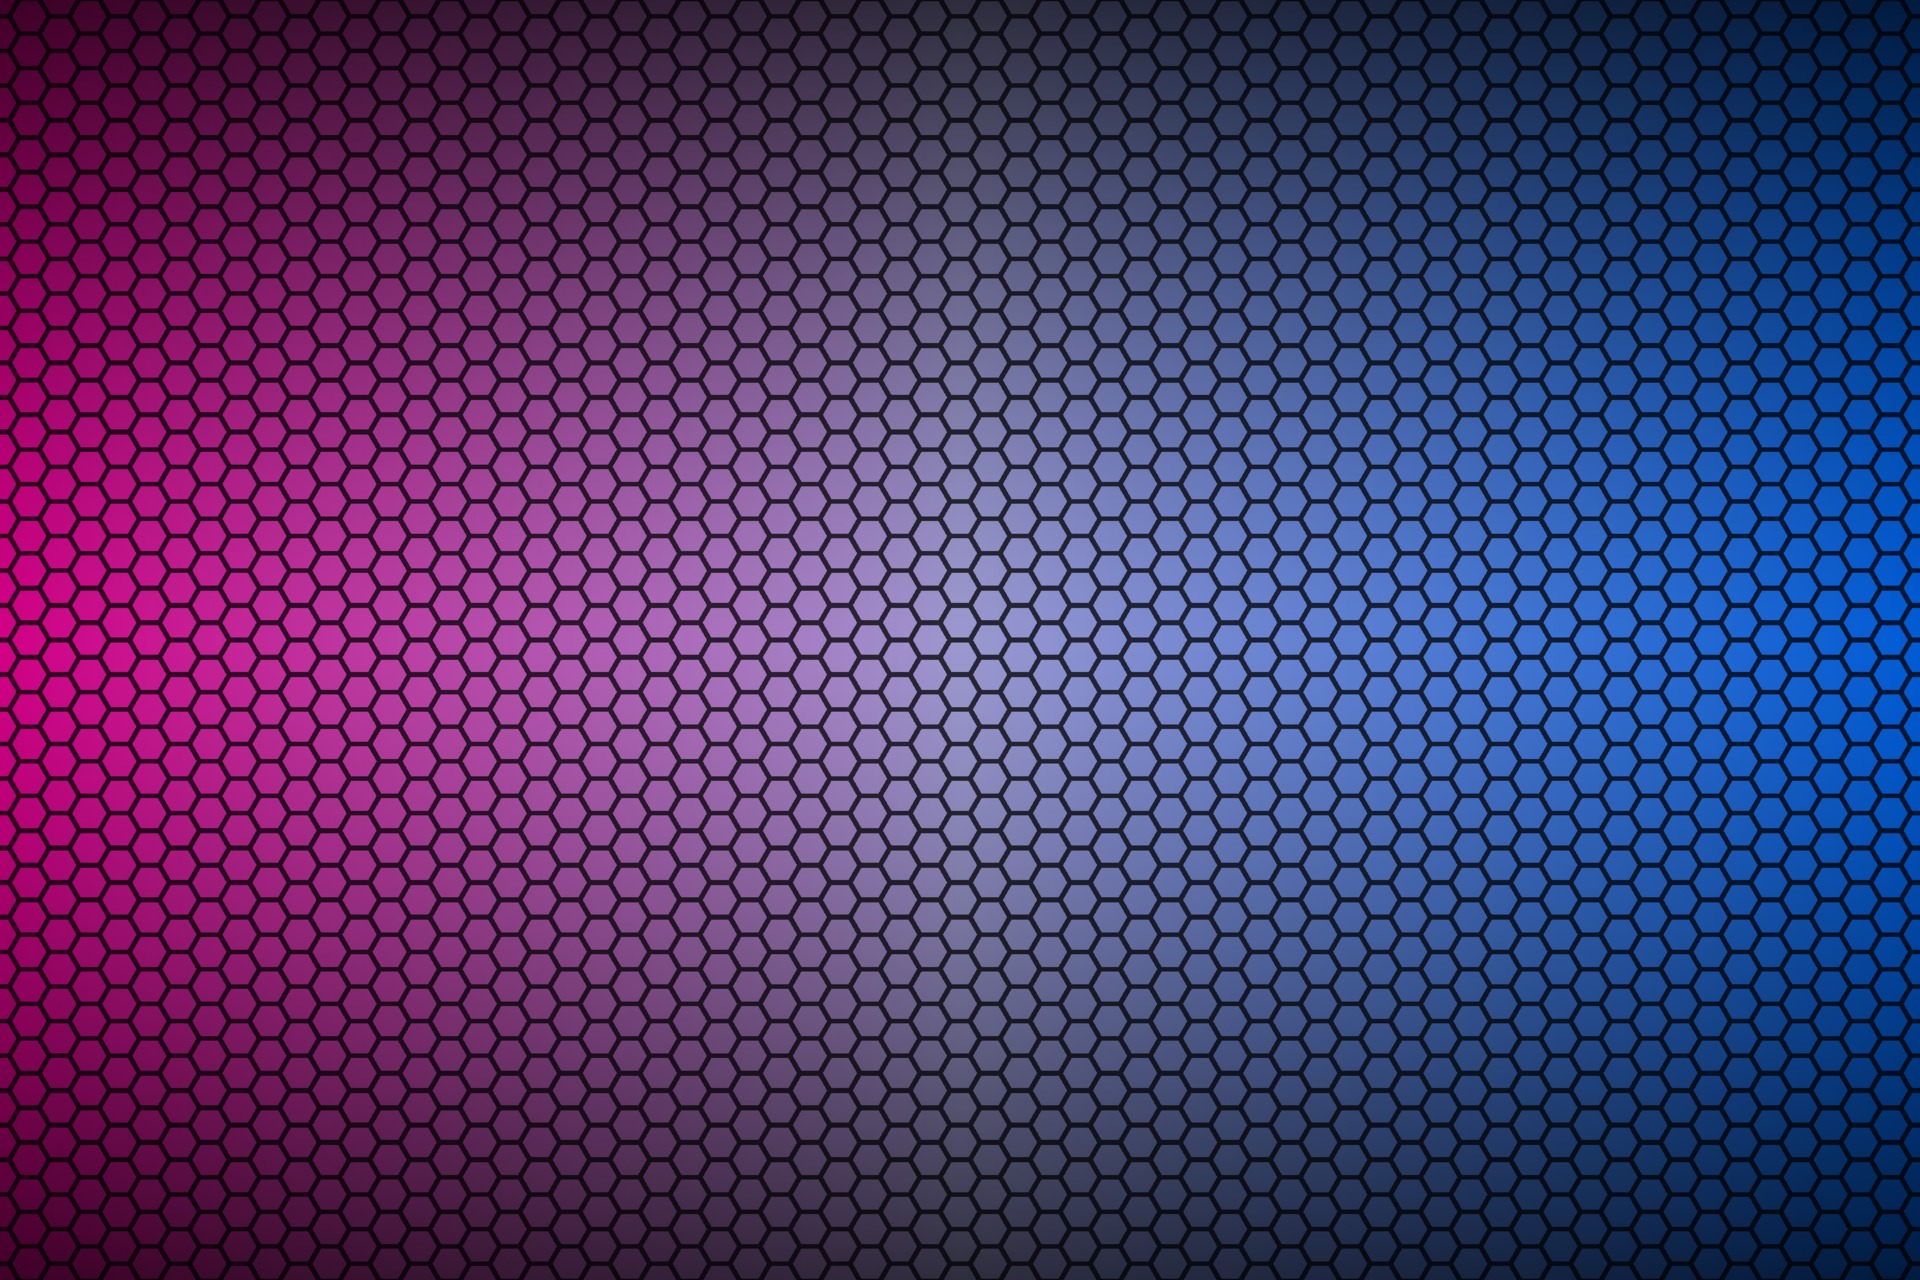 Abstract blue and purple neon geometric hexagonal mesh material background. Perforated metallic technology wallpaper. Vector abstract widescreen background